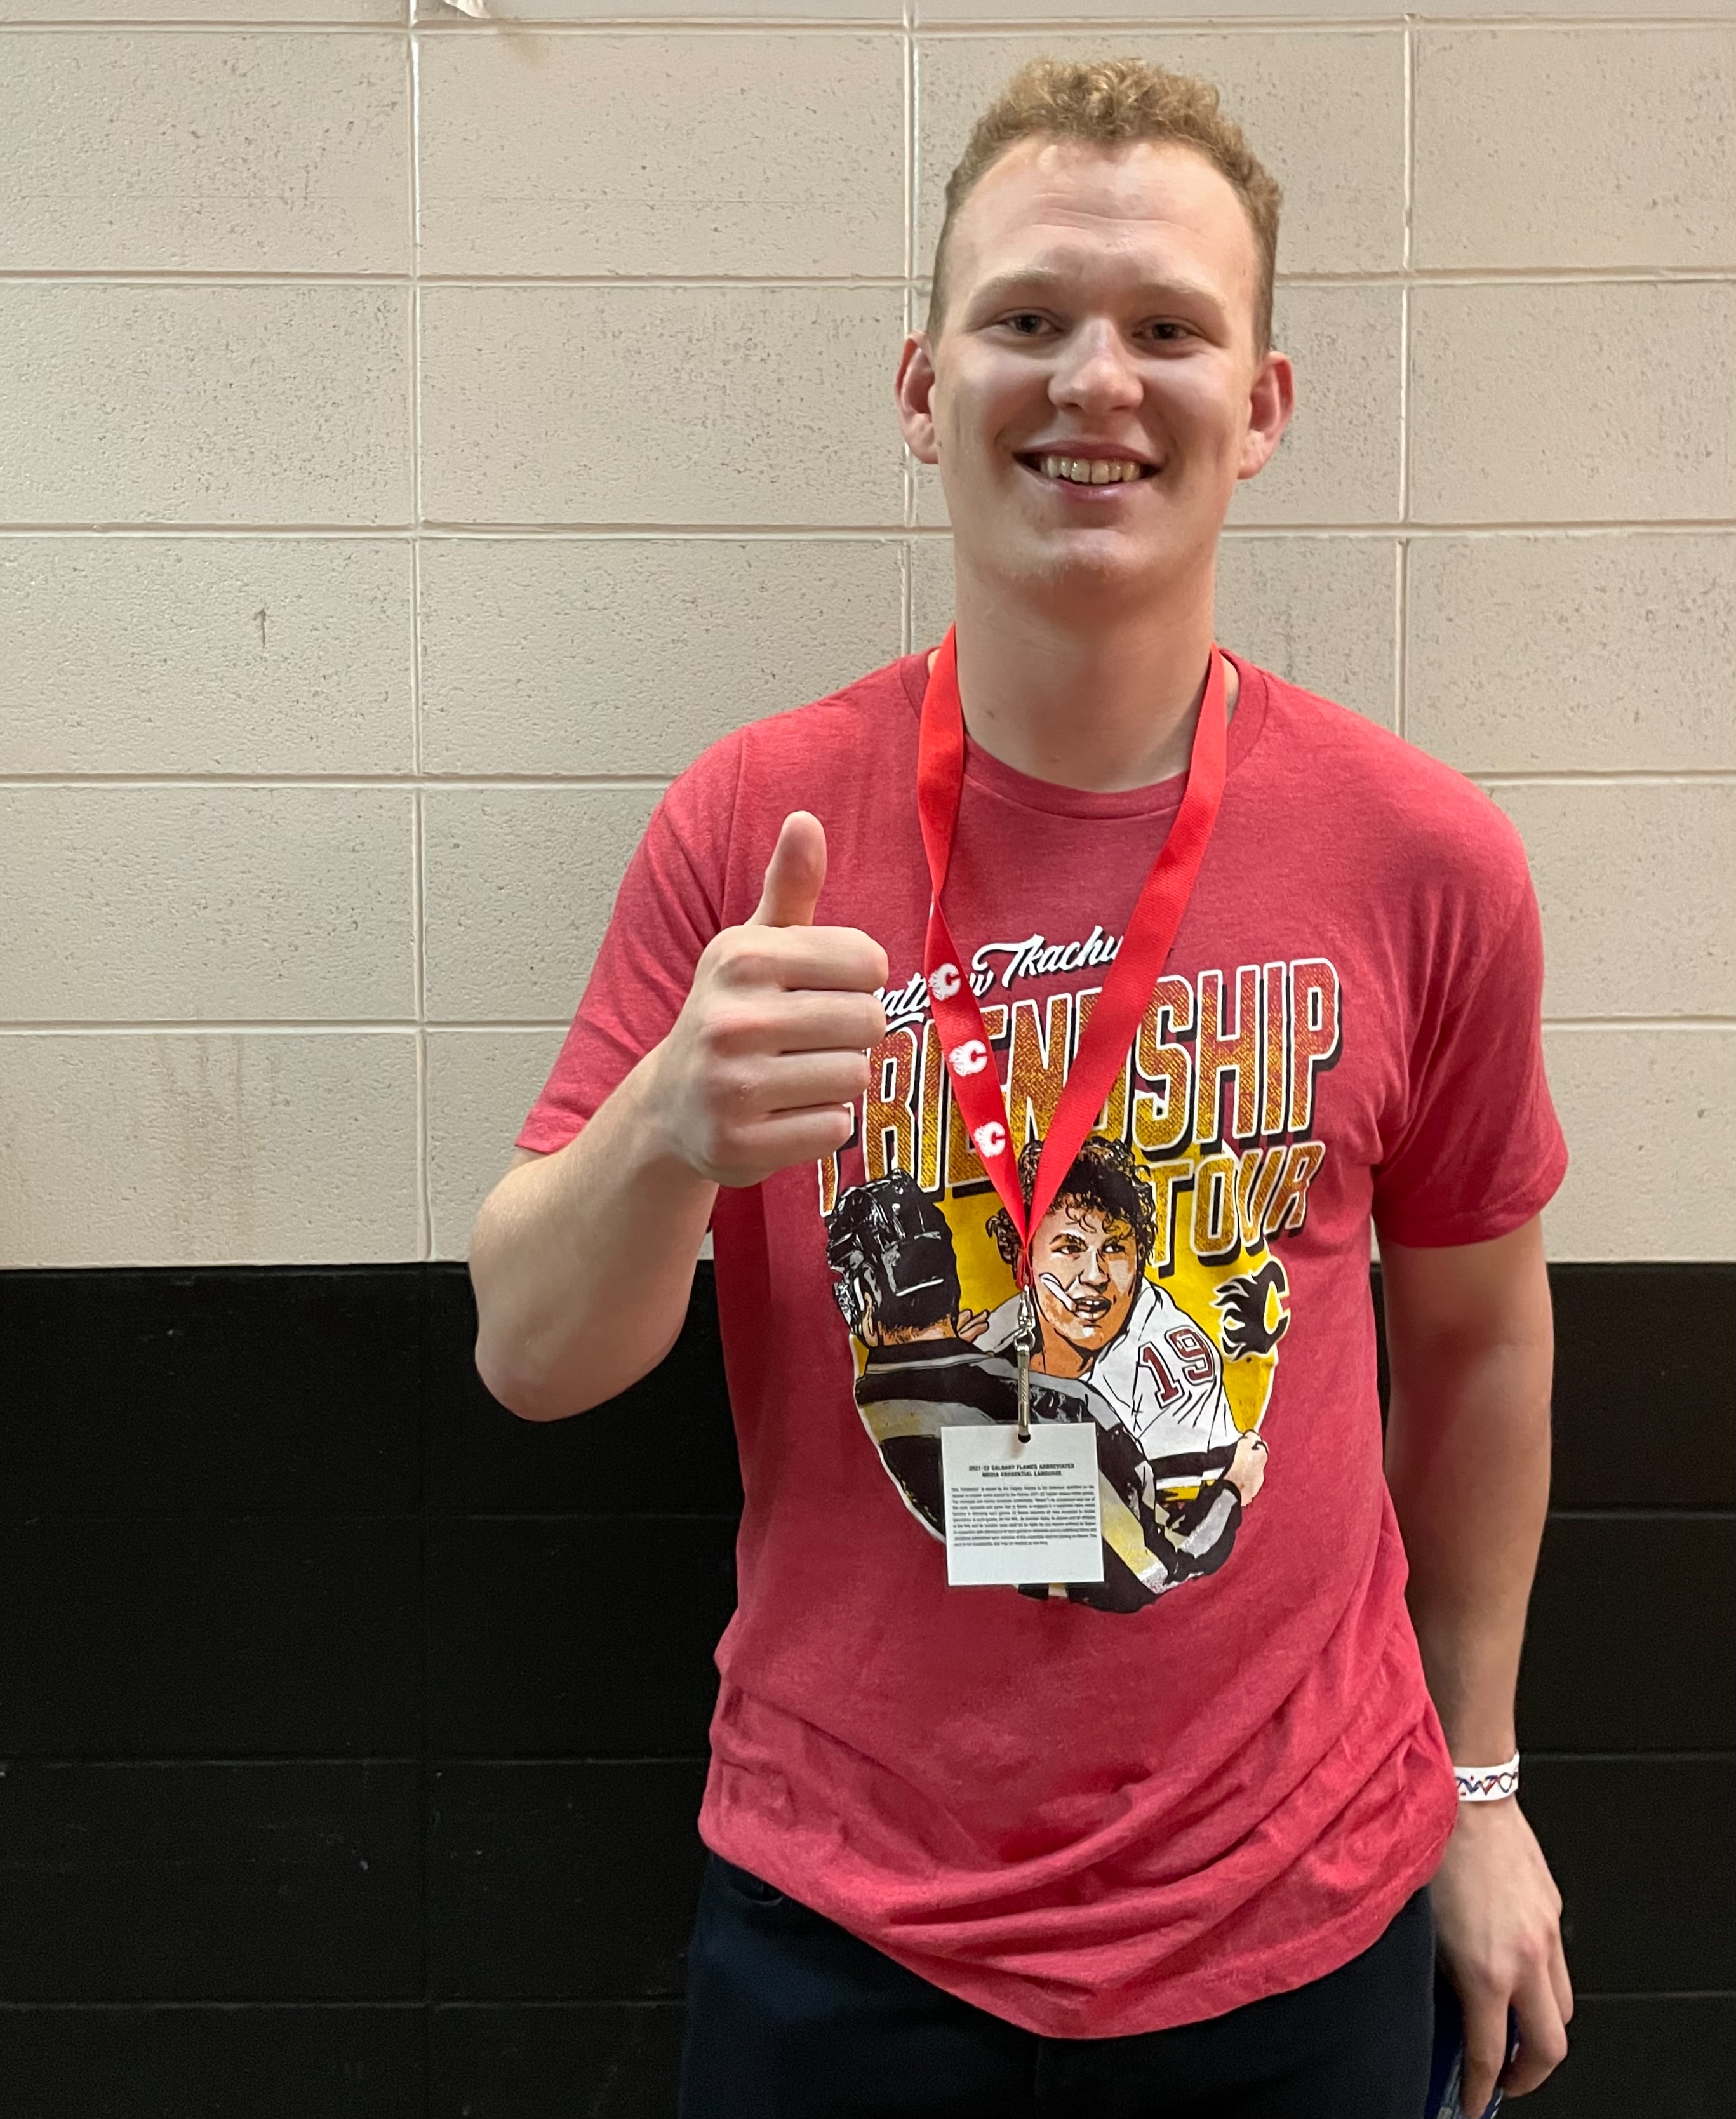 CGY Team Store on X: Our Matthew Tkachuk Friendship Tour t-shirts are back  in stock! Grab yours at one of our #yyc locations or online:    / X